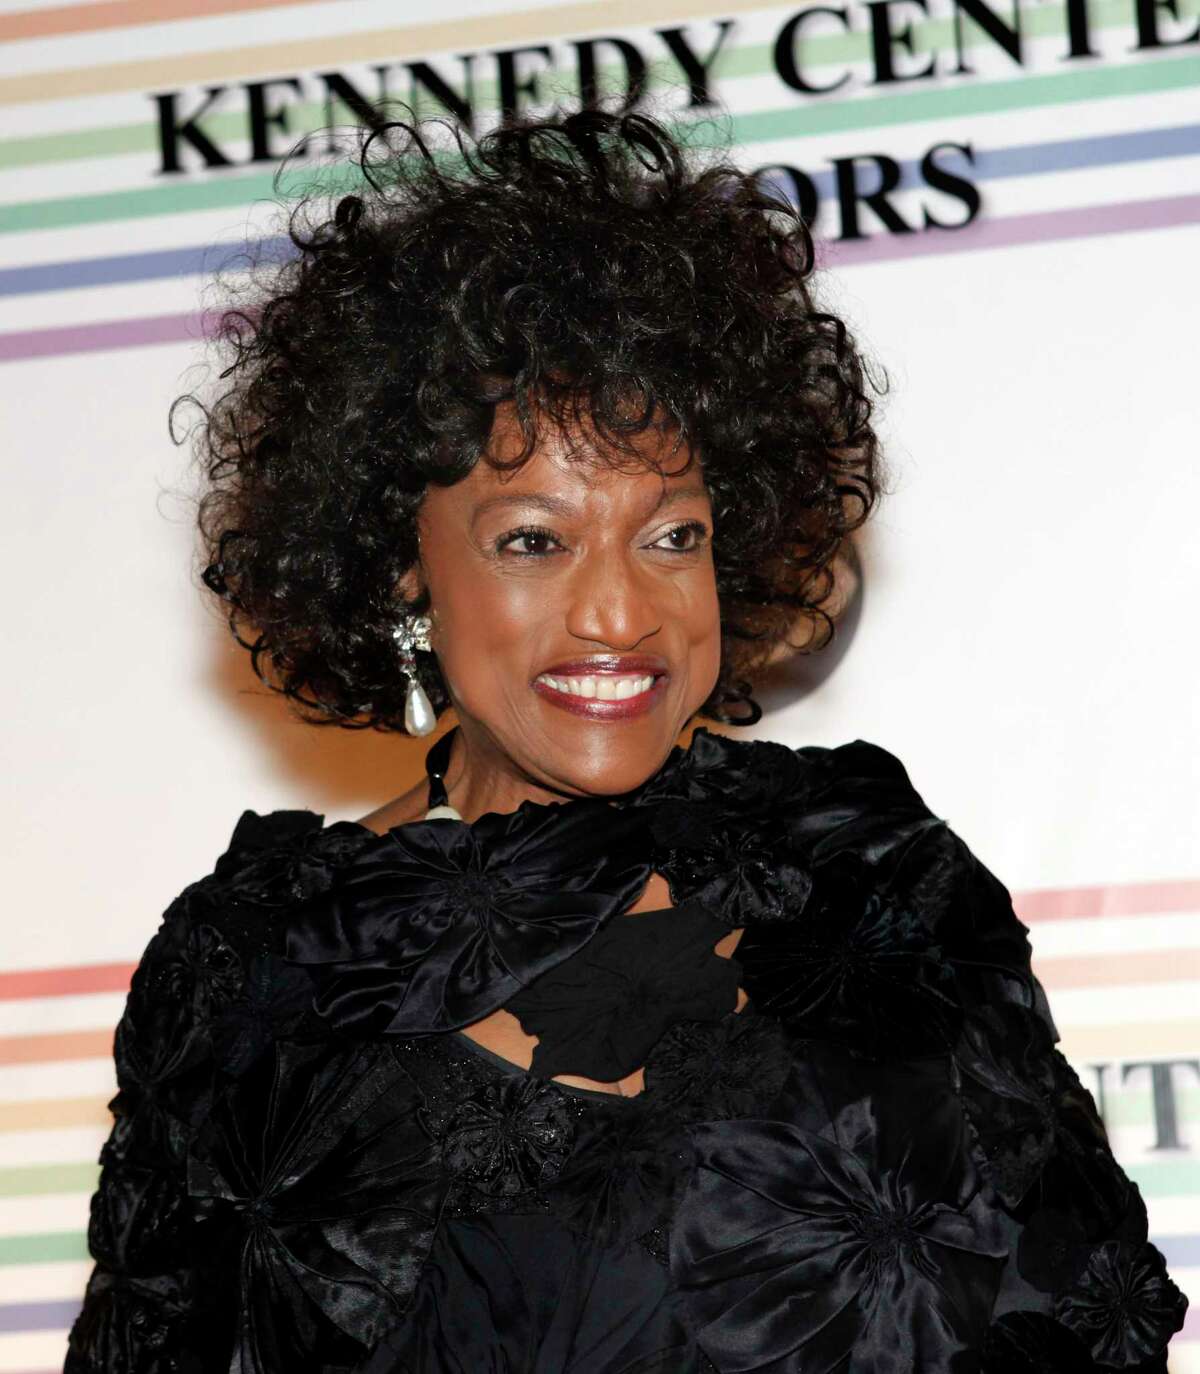 FILE - This Dec. 5, 2010 file photo shows opera singer Jessye Norman at the Kennedy Center Honors in Washington. Norman died, Monday, Sept. 30, 2019, at Mount Sinai St. Lukeas Hospital in New York. She was 74. (AP Photo/Jacquelyn Martin, File)